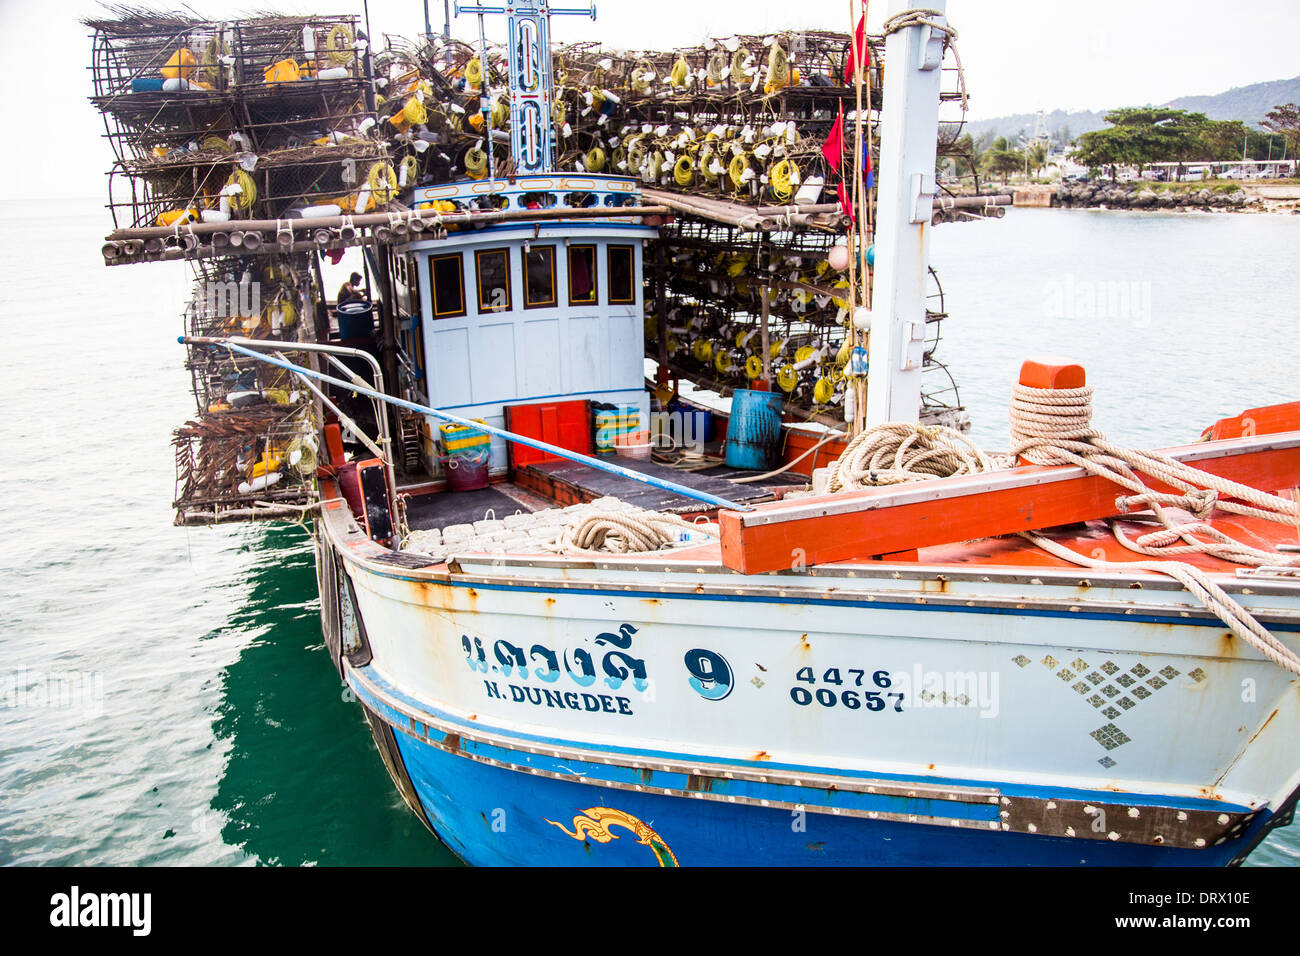 Crab trap floats and buoys pilled on a commercial fishing vessel in a  marina in Oregon USA Stock Photo - Alamy